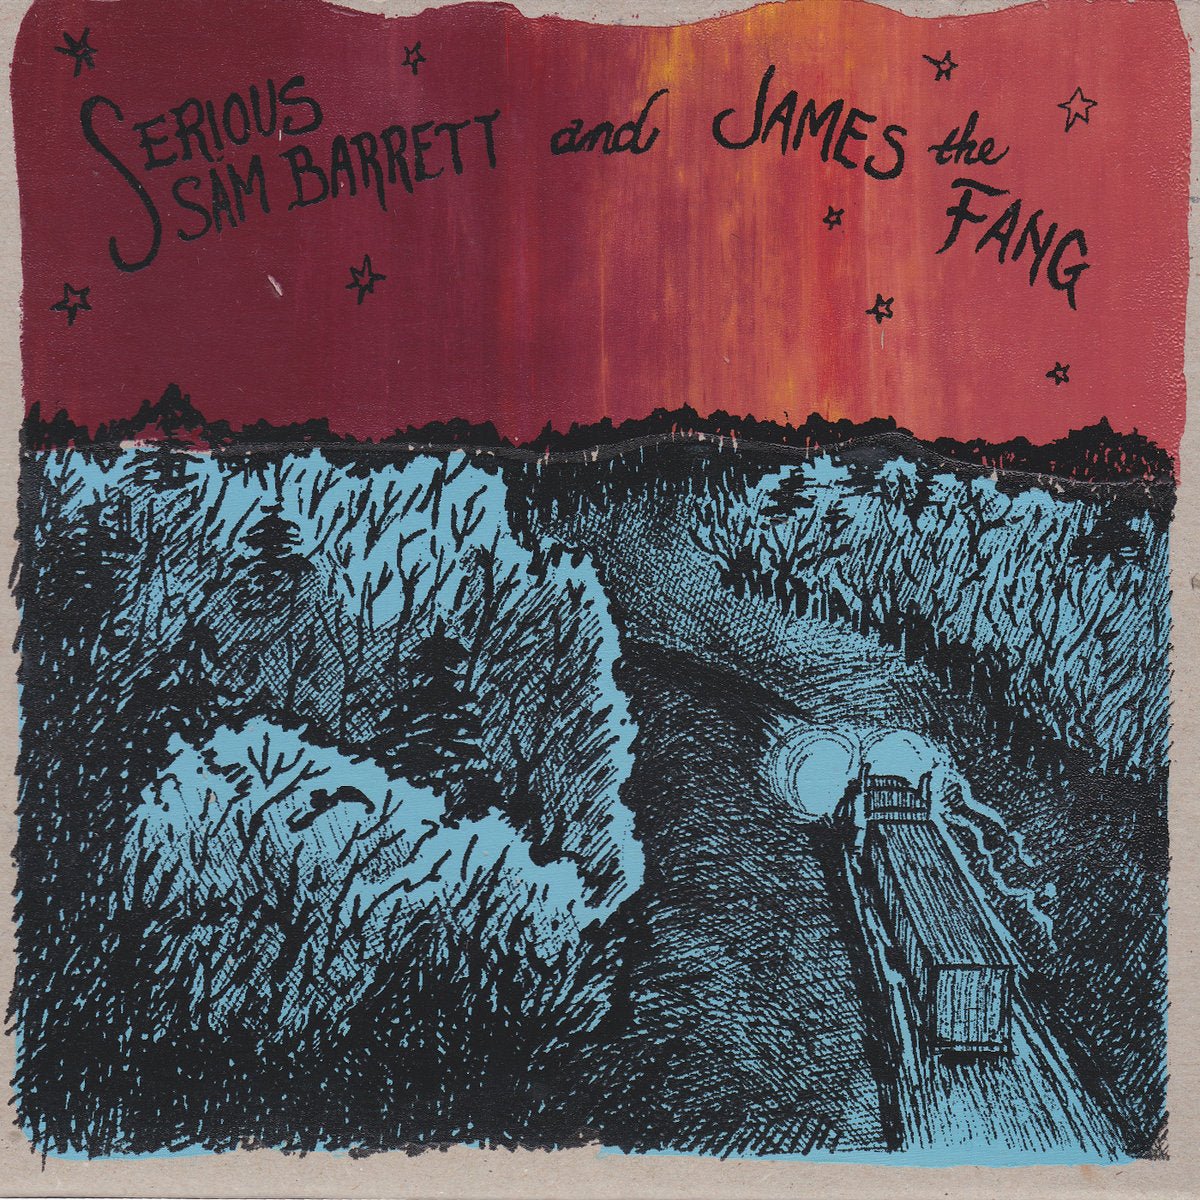 Serious Sam Barrett & James The Fang - Highways & Stop Signs 7" - Vinyl - Donor